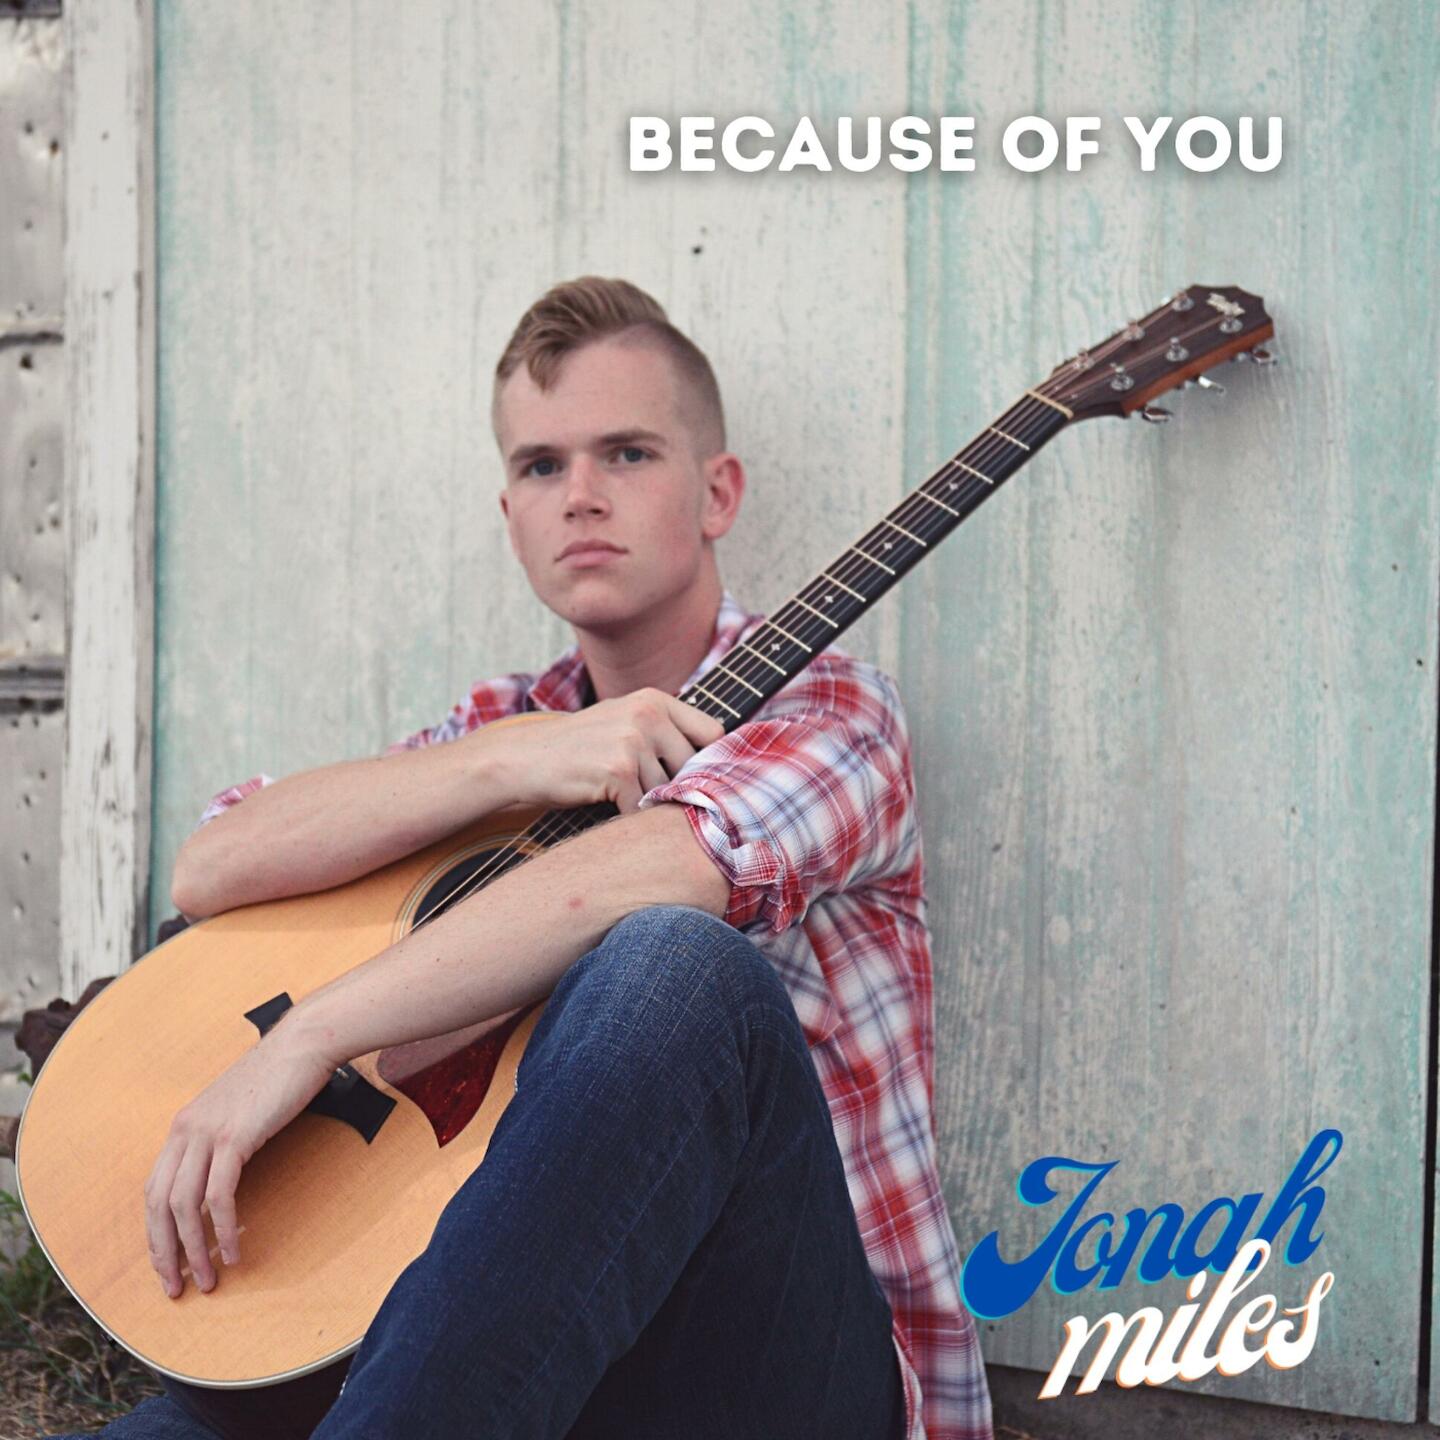 Because Of You - Jonah Miles 